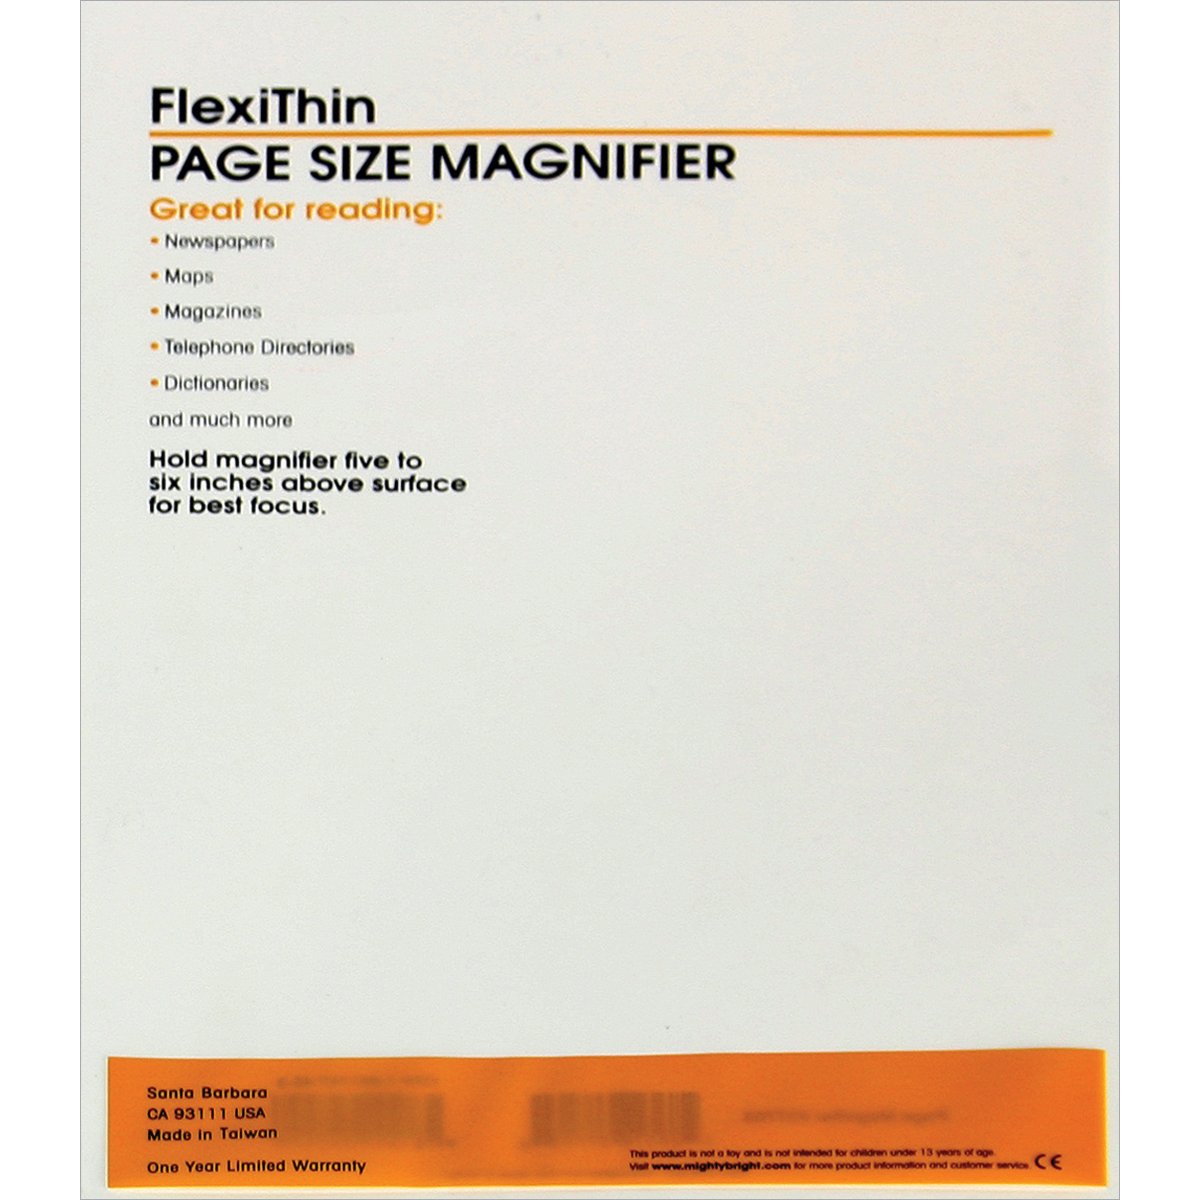 Large Flexithin Magnifier - Mighty Bright